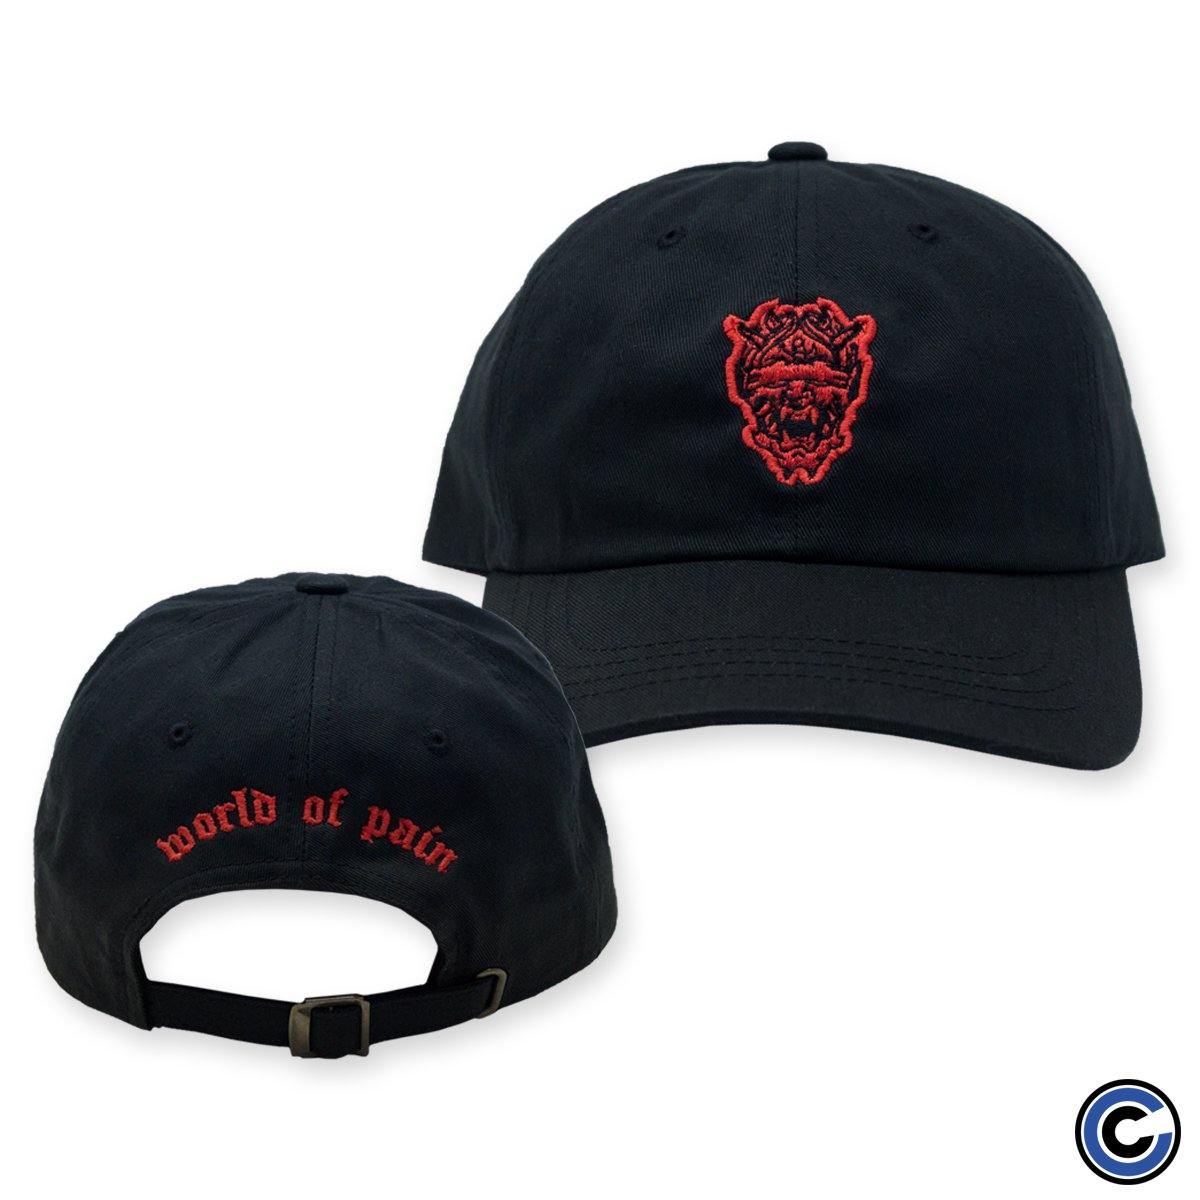 Buy – World of Pain "Demon" Hat – Band & Music Merch – Cold Cuts Merch